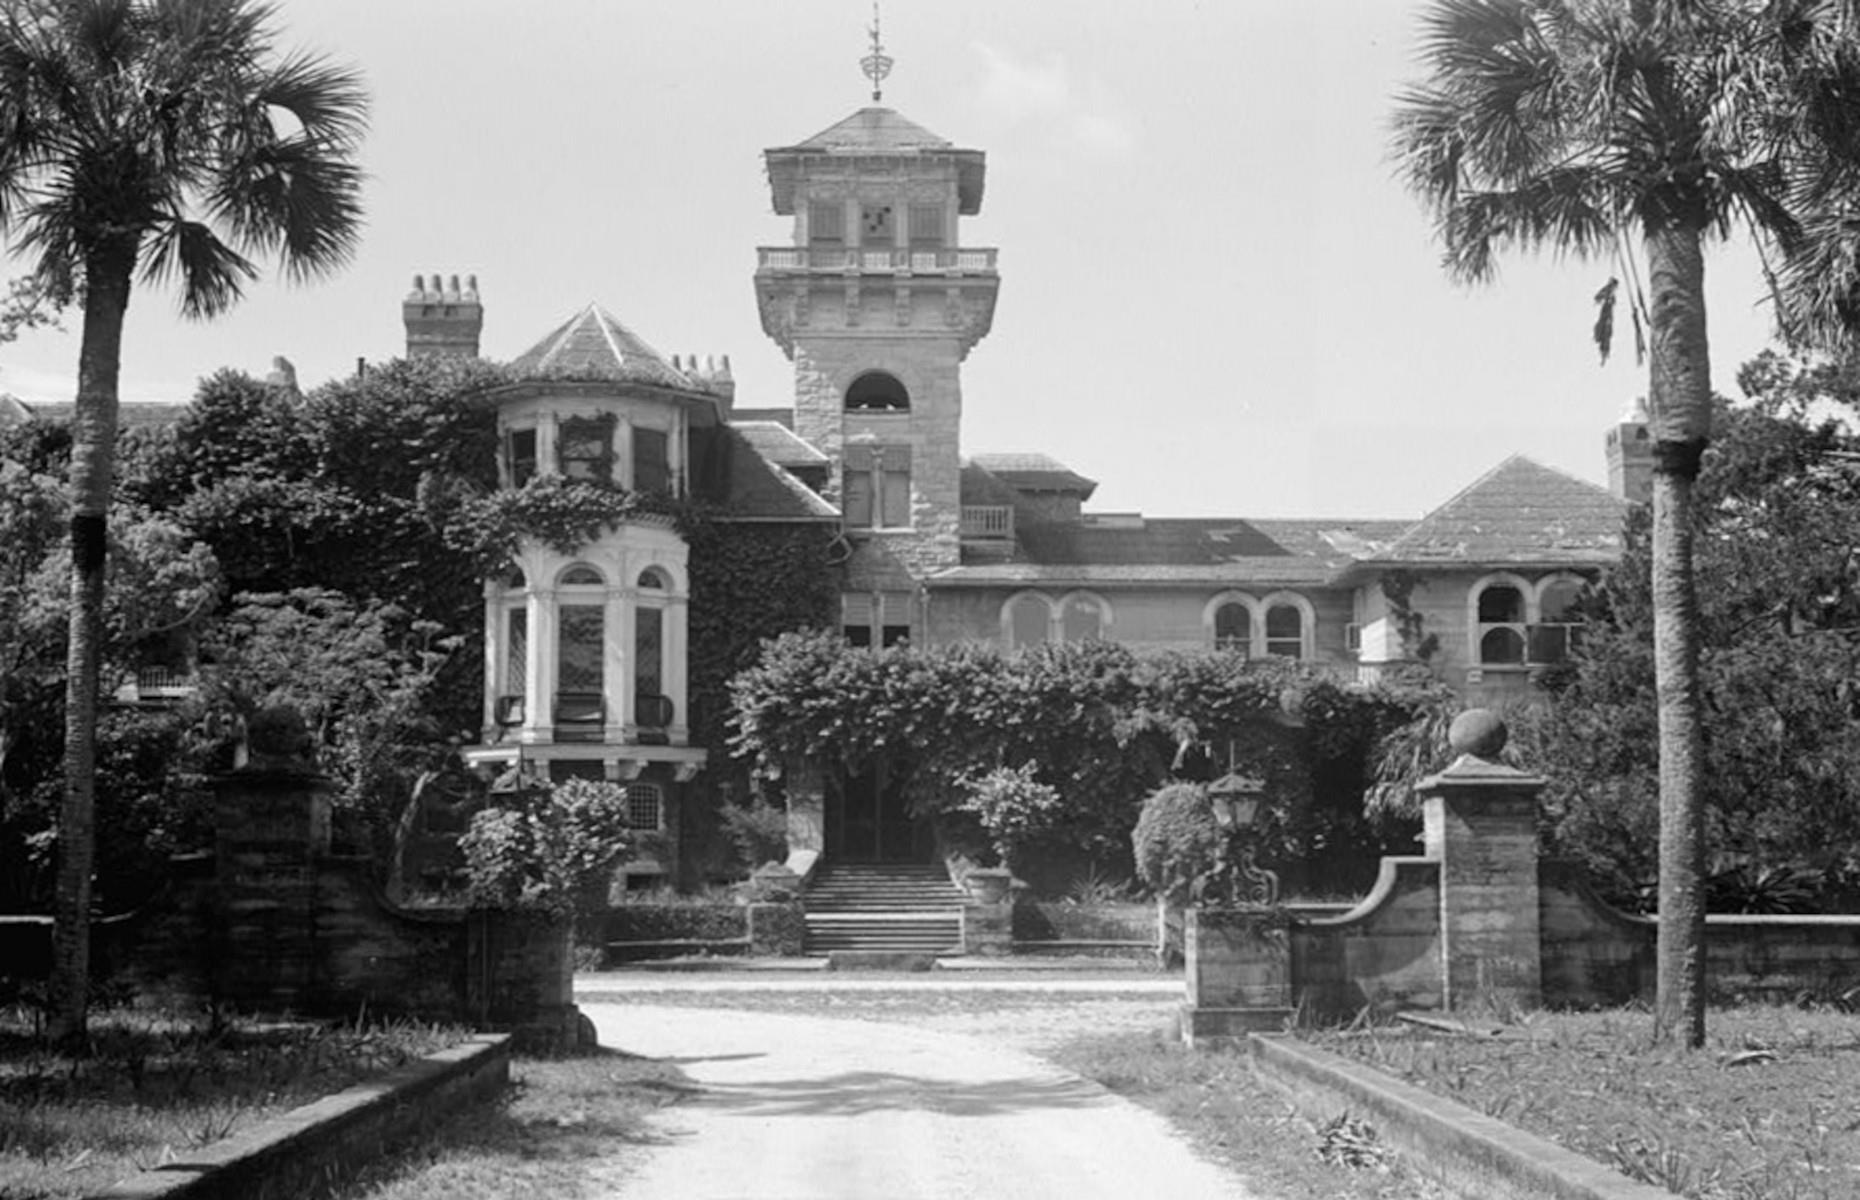 <p>The spectacular estate included multiple pools, a golf course and 40 auxiliary buildings to house the 200-odd servants required to keep a mansion of that size operational. Between 1881 and 1886, Carnegie continued to buy up land on Cumberland Island to expand the estate, which had yet to be finished to his satisfaction before his sudden death in 1886.</p>  <p>Thomas’ wife Lucy finished the house’s construction herself, and turned Dungeness into the family’s primary home until her own death in 1916.</p>